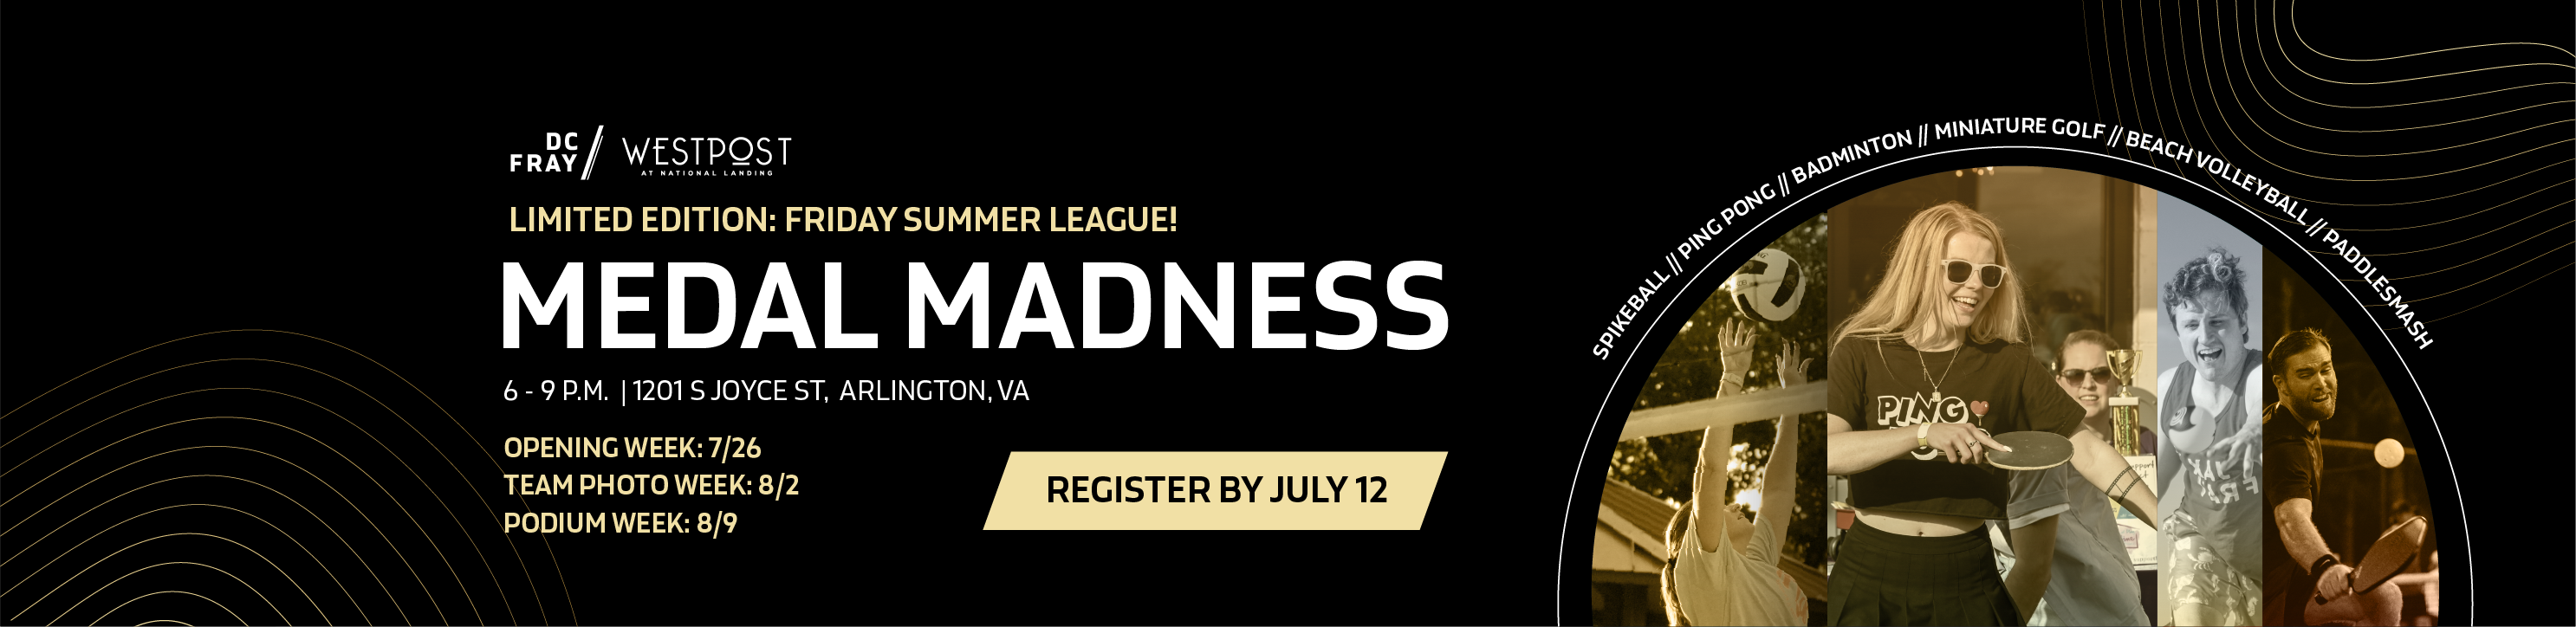 Medal Madness at Westpost: Limited Edition Friday Summer League